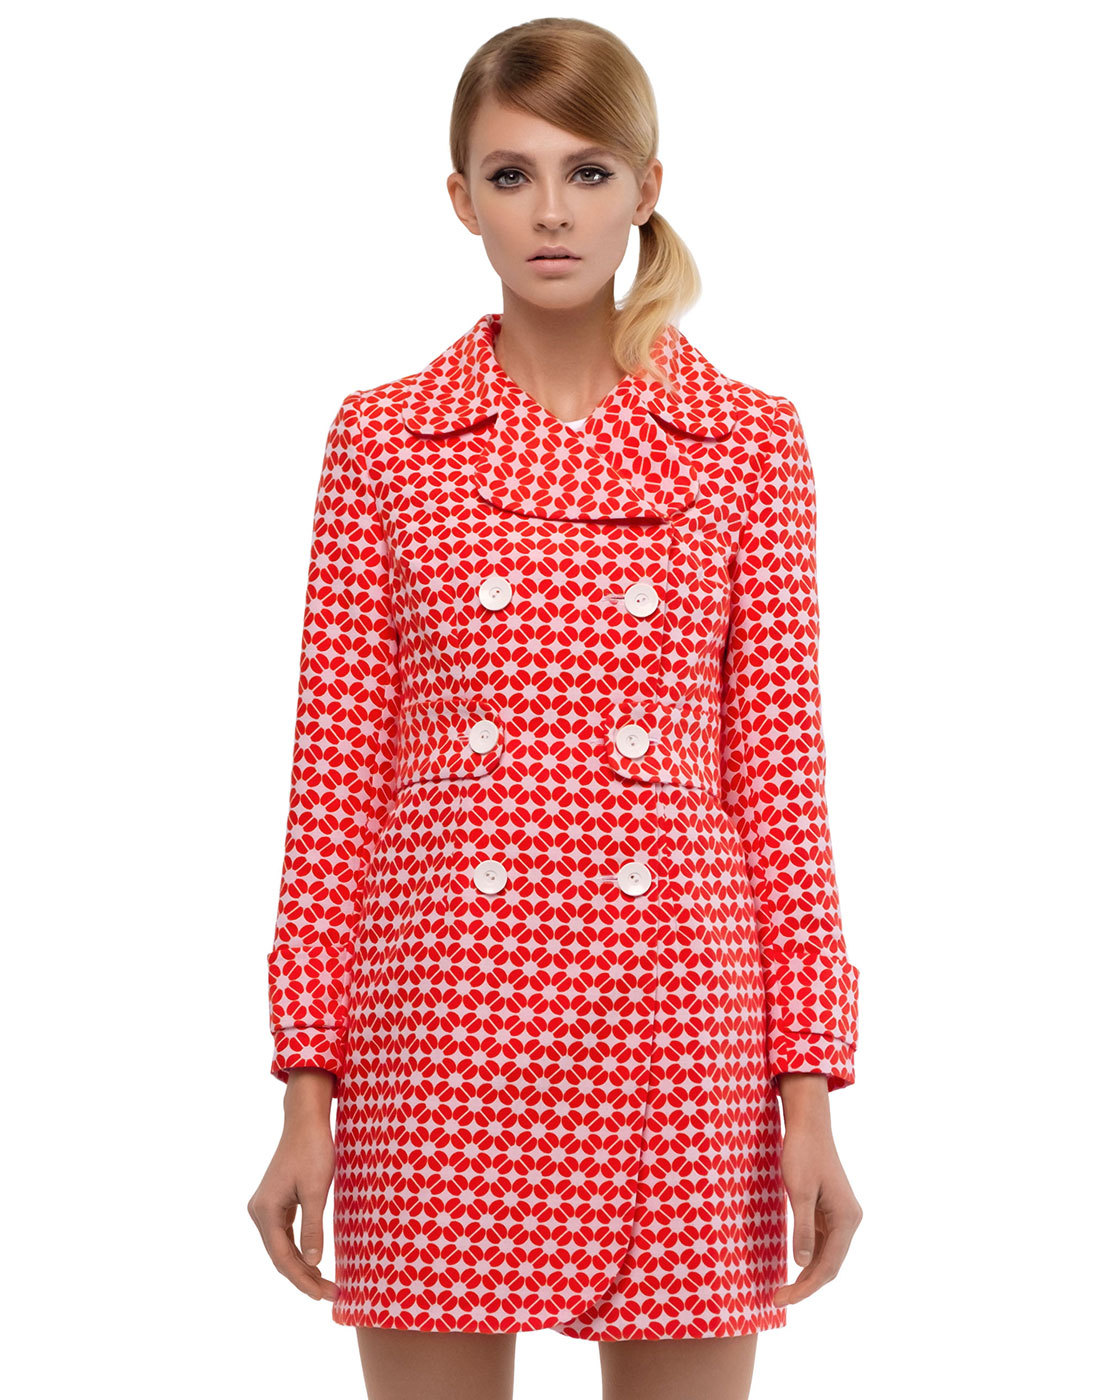 MARMALADE 60s Mod Double Breasted Geo Floral Coat